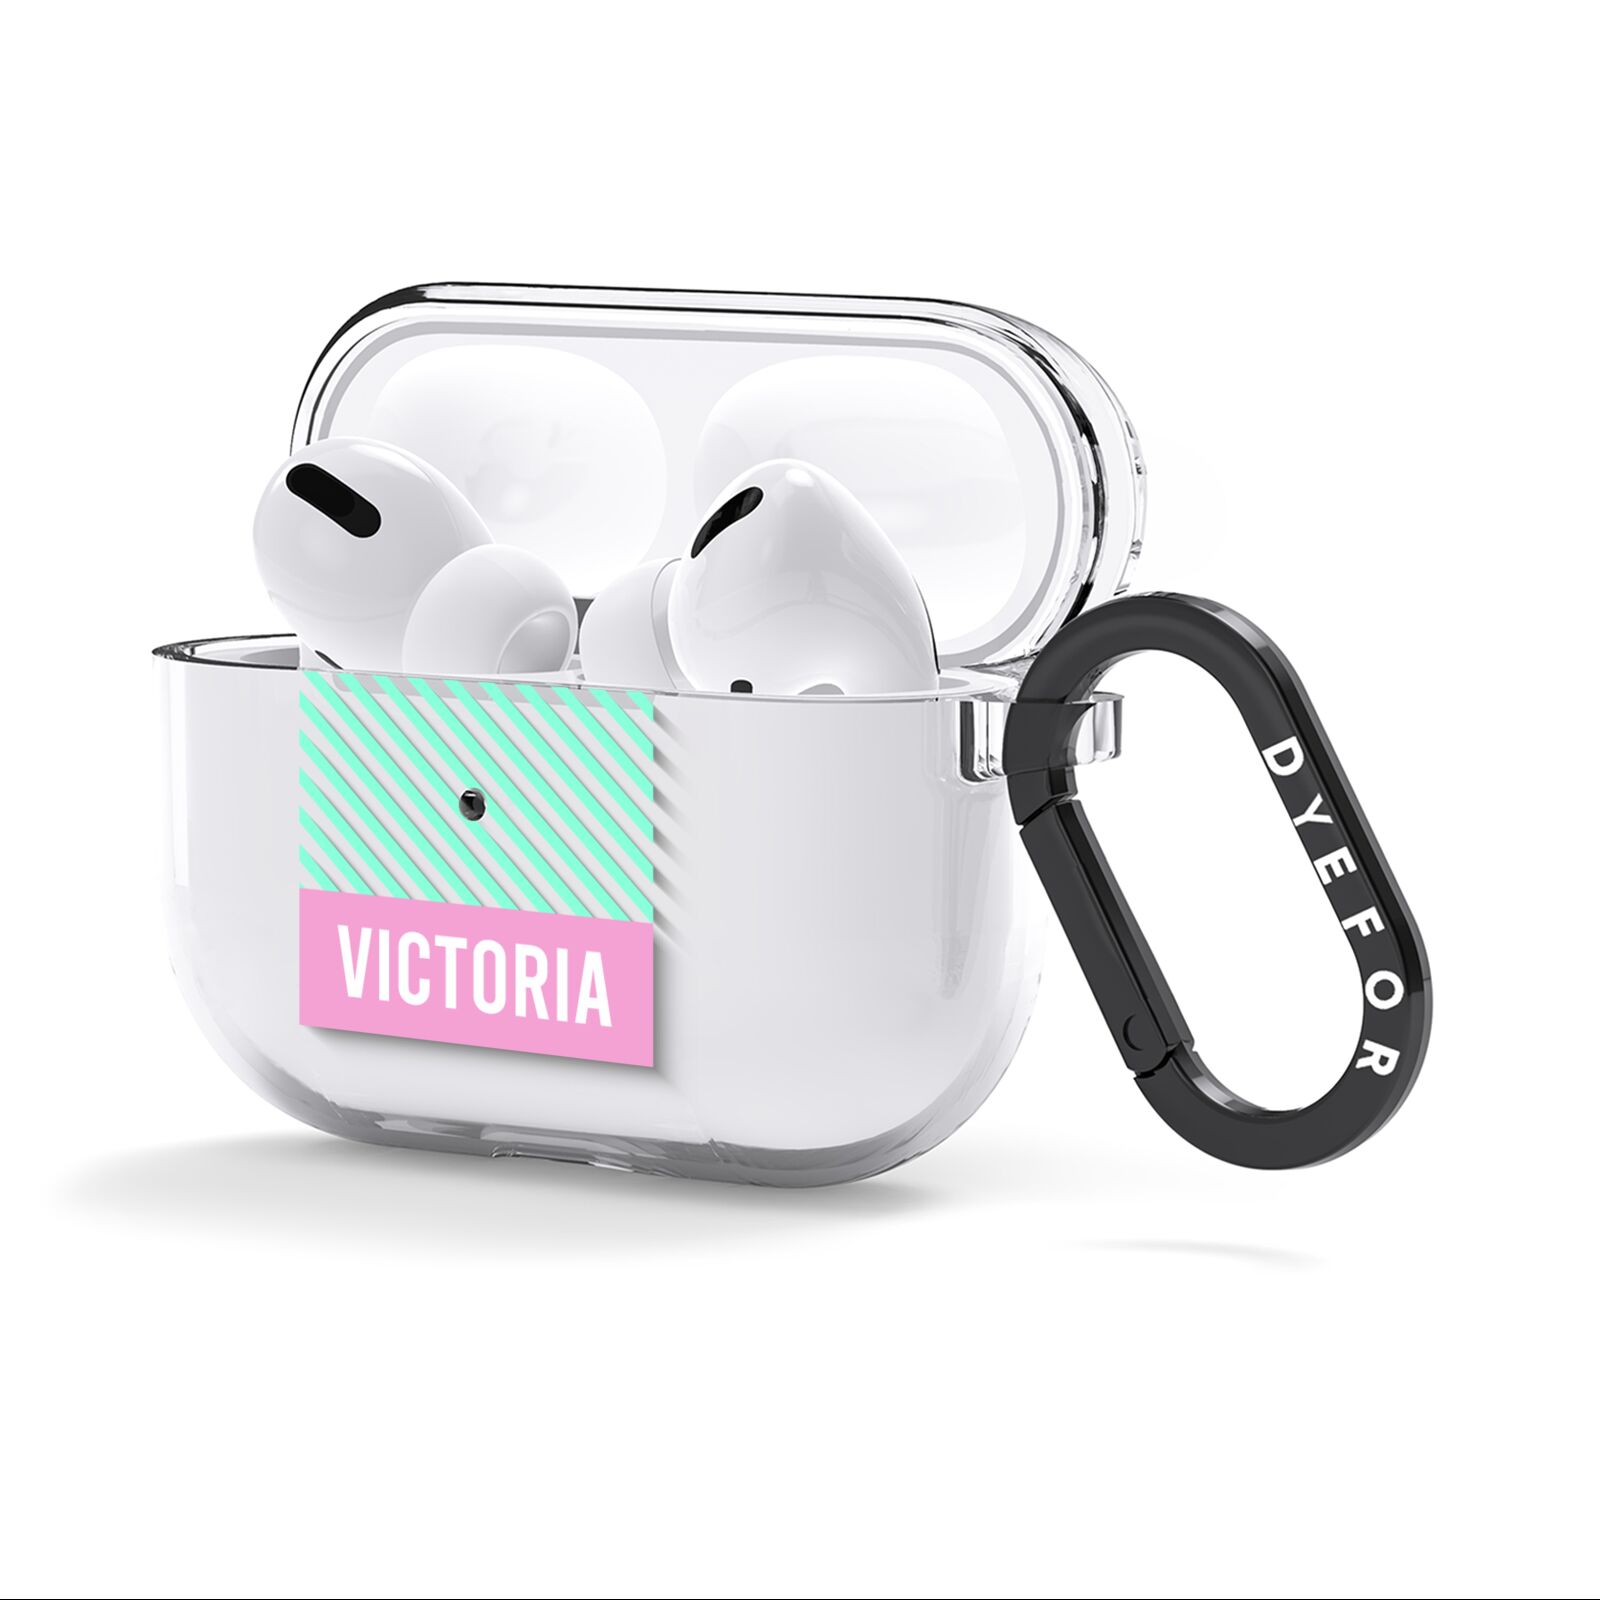 Personalised Pink Aqua Striped AirPods Clear Case 3rd Gen Side Image